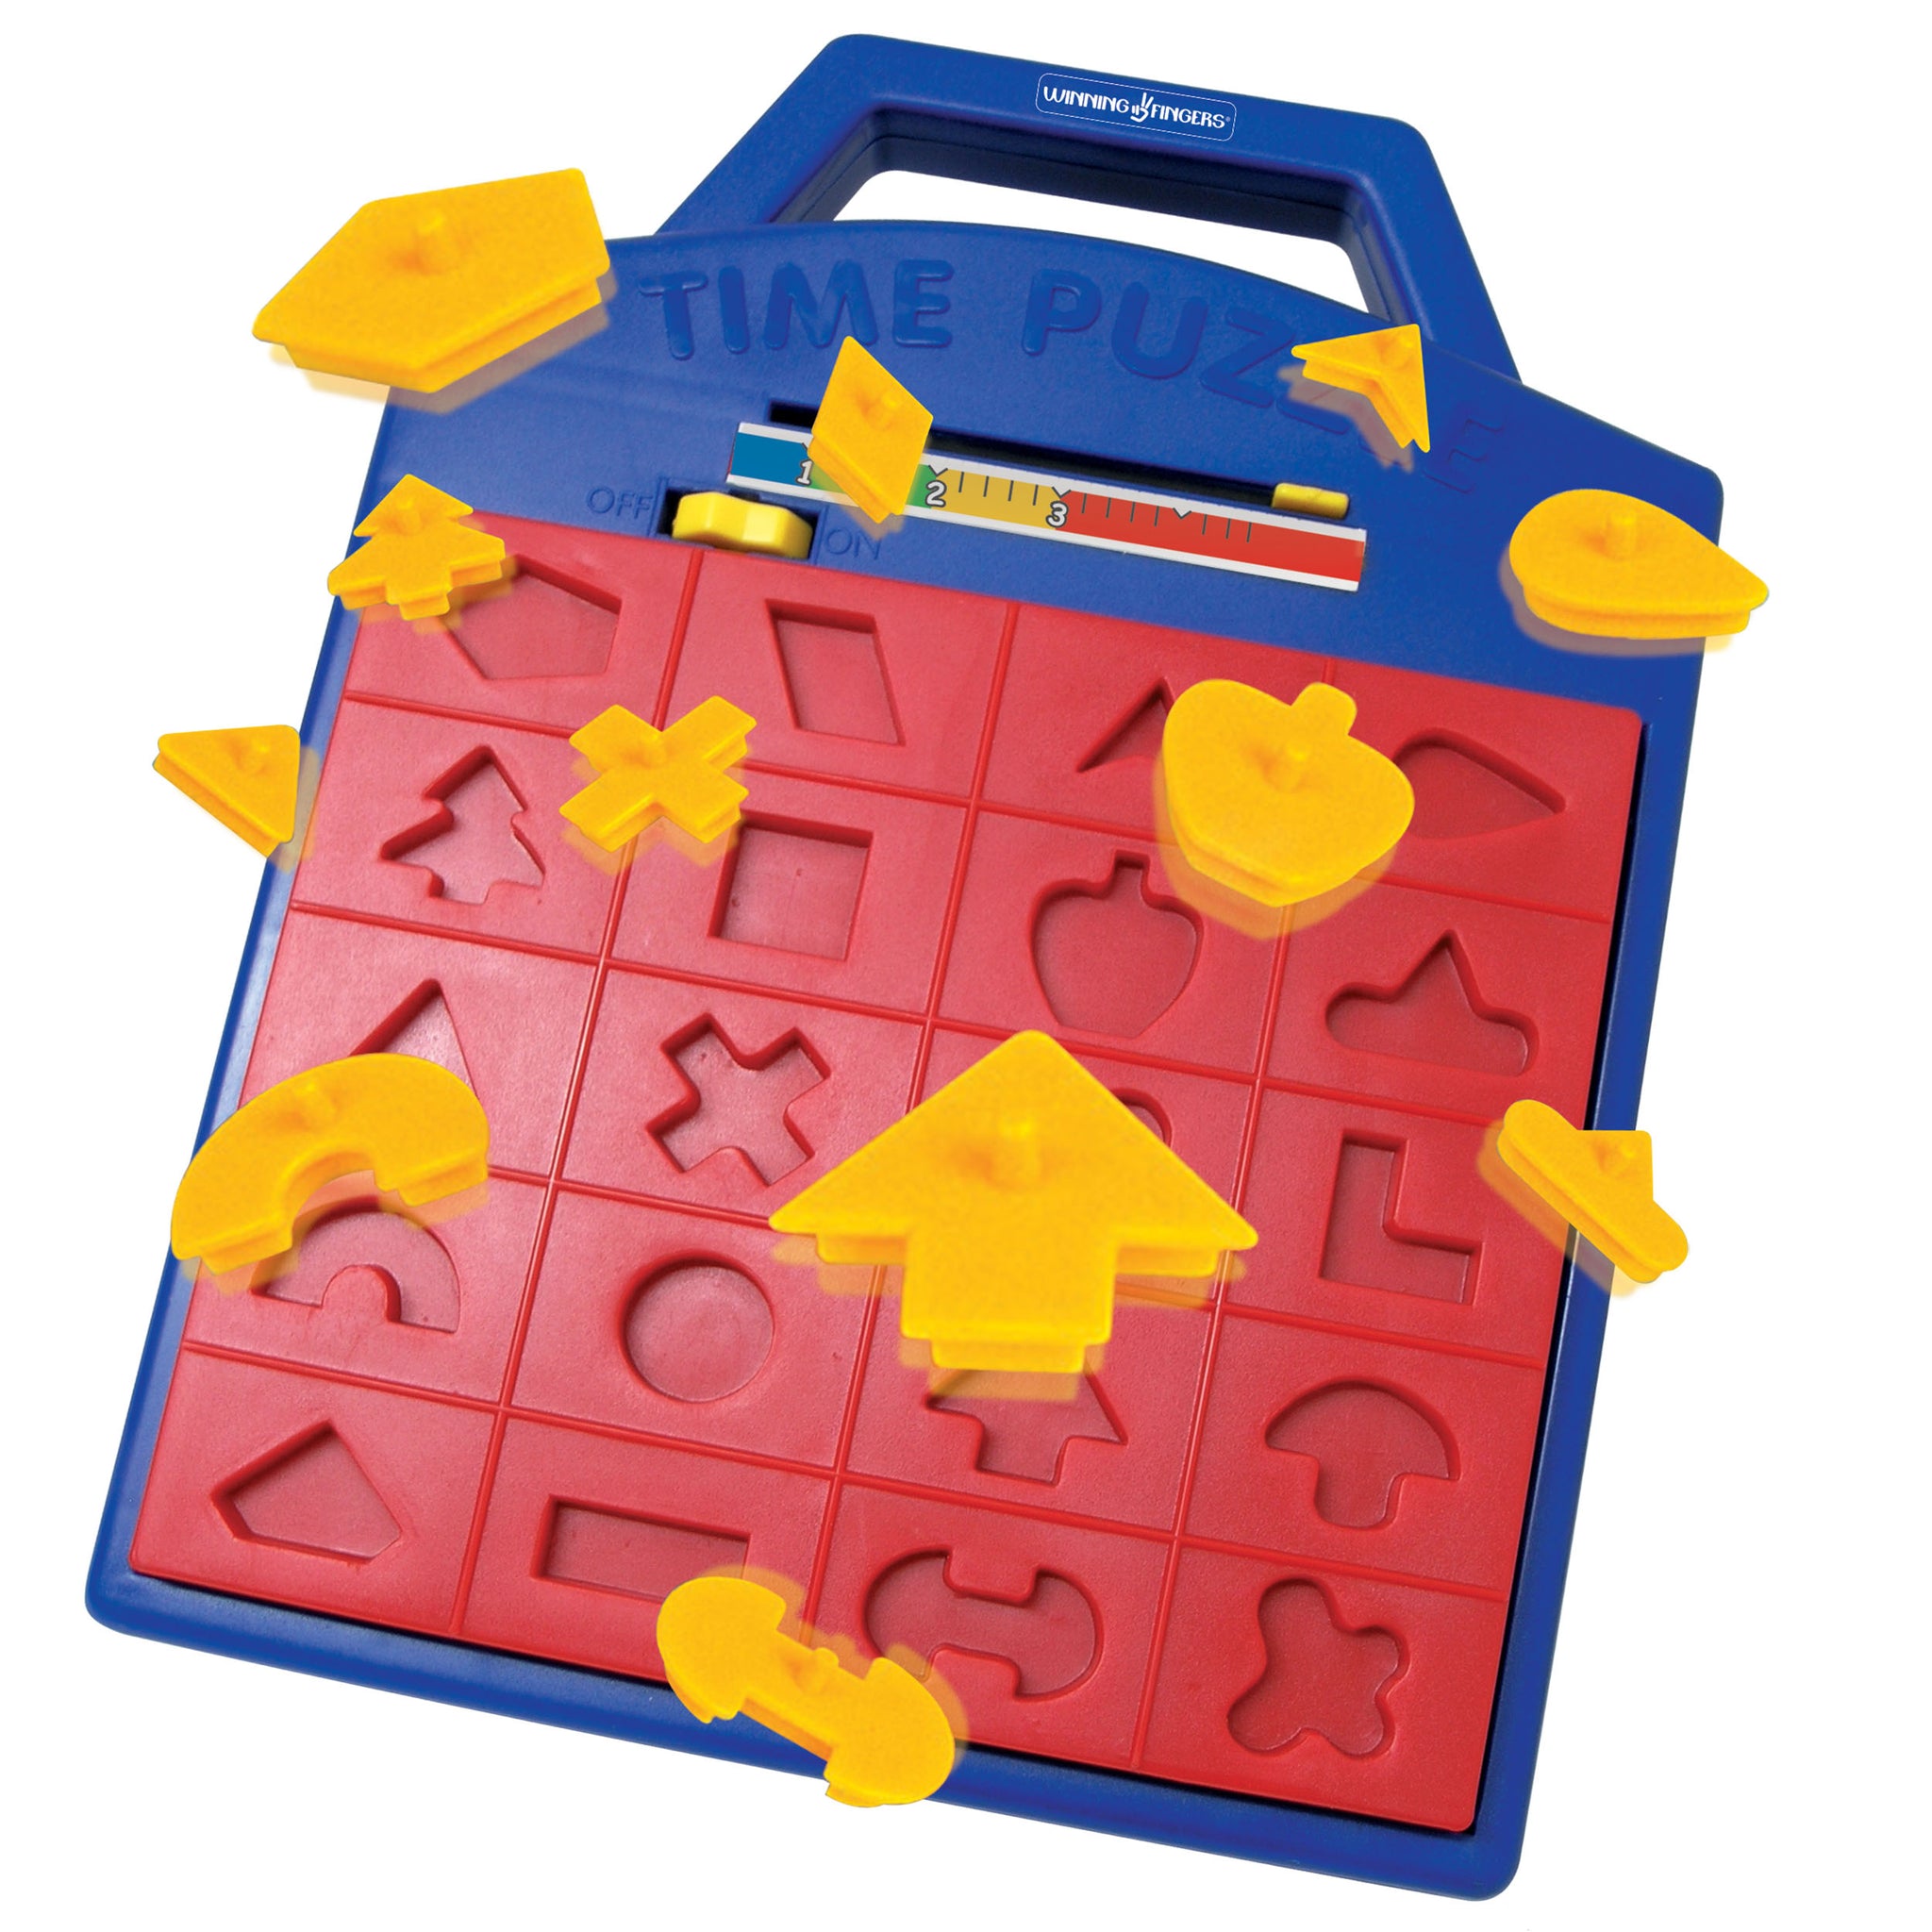 Winning Fingers Shape Toy Puzzle Game